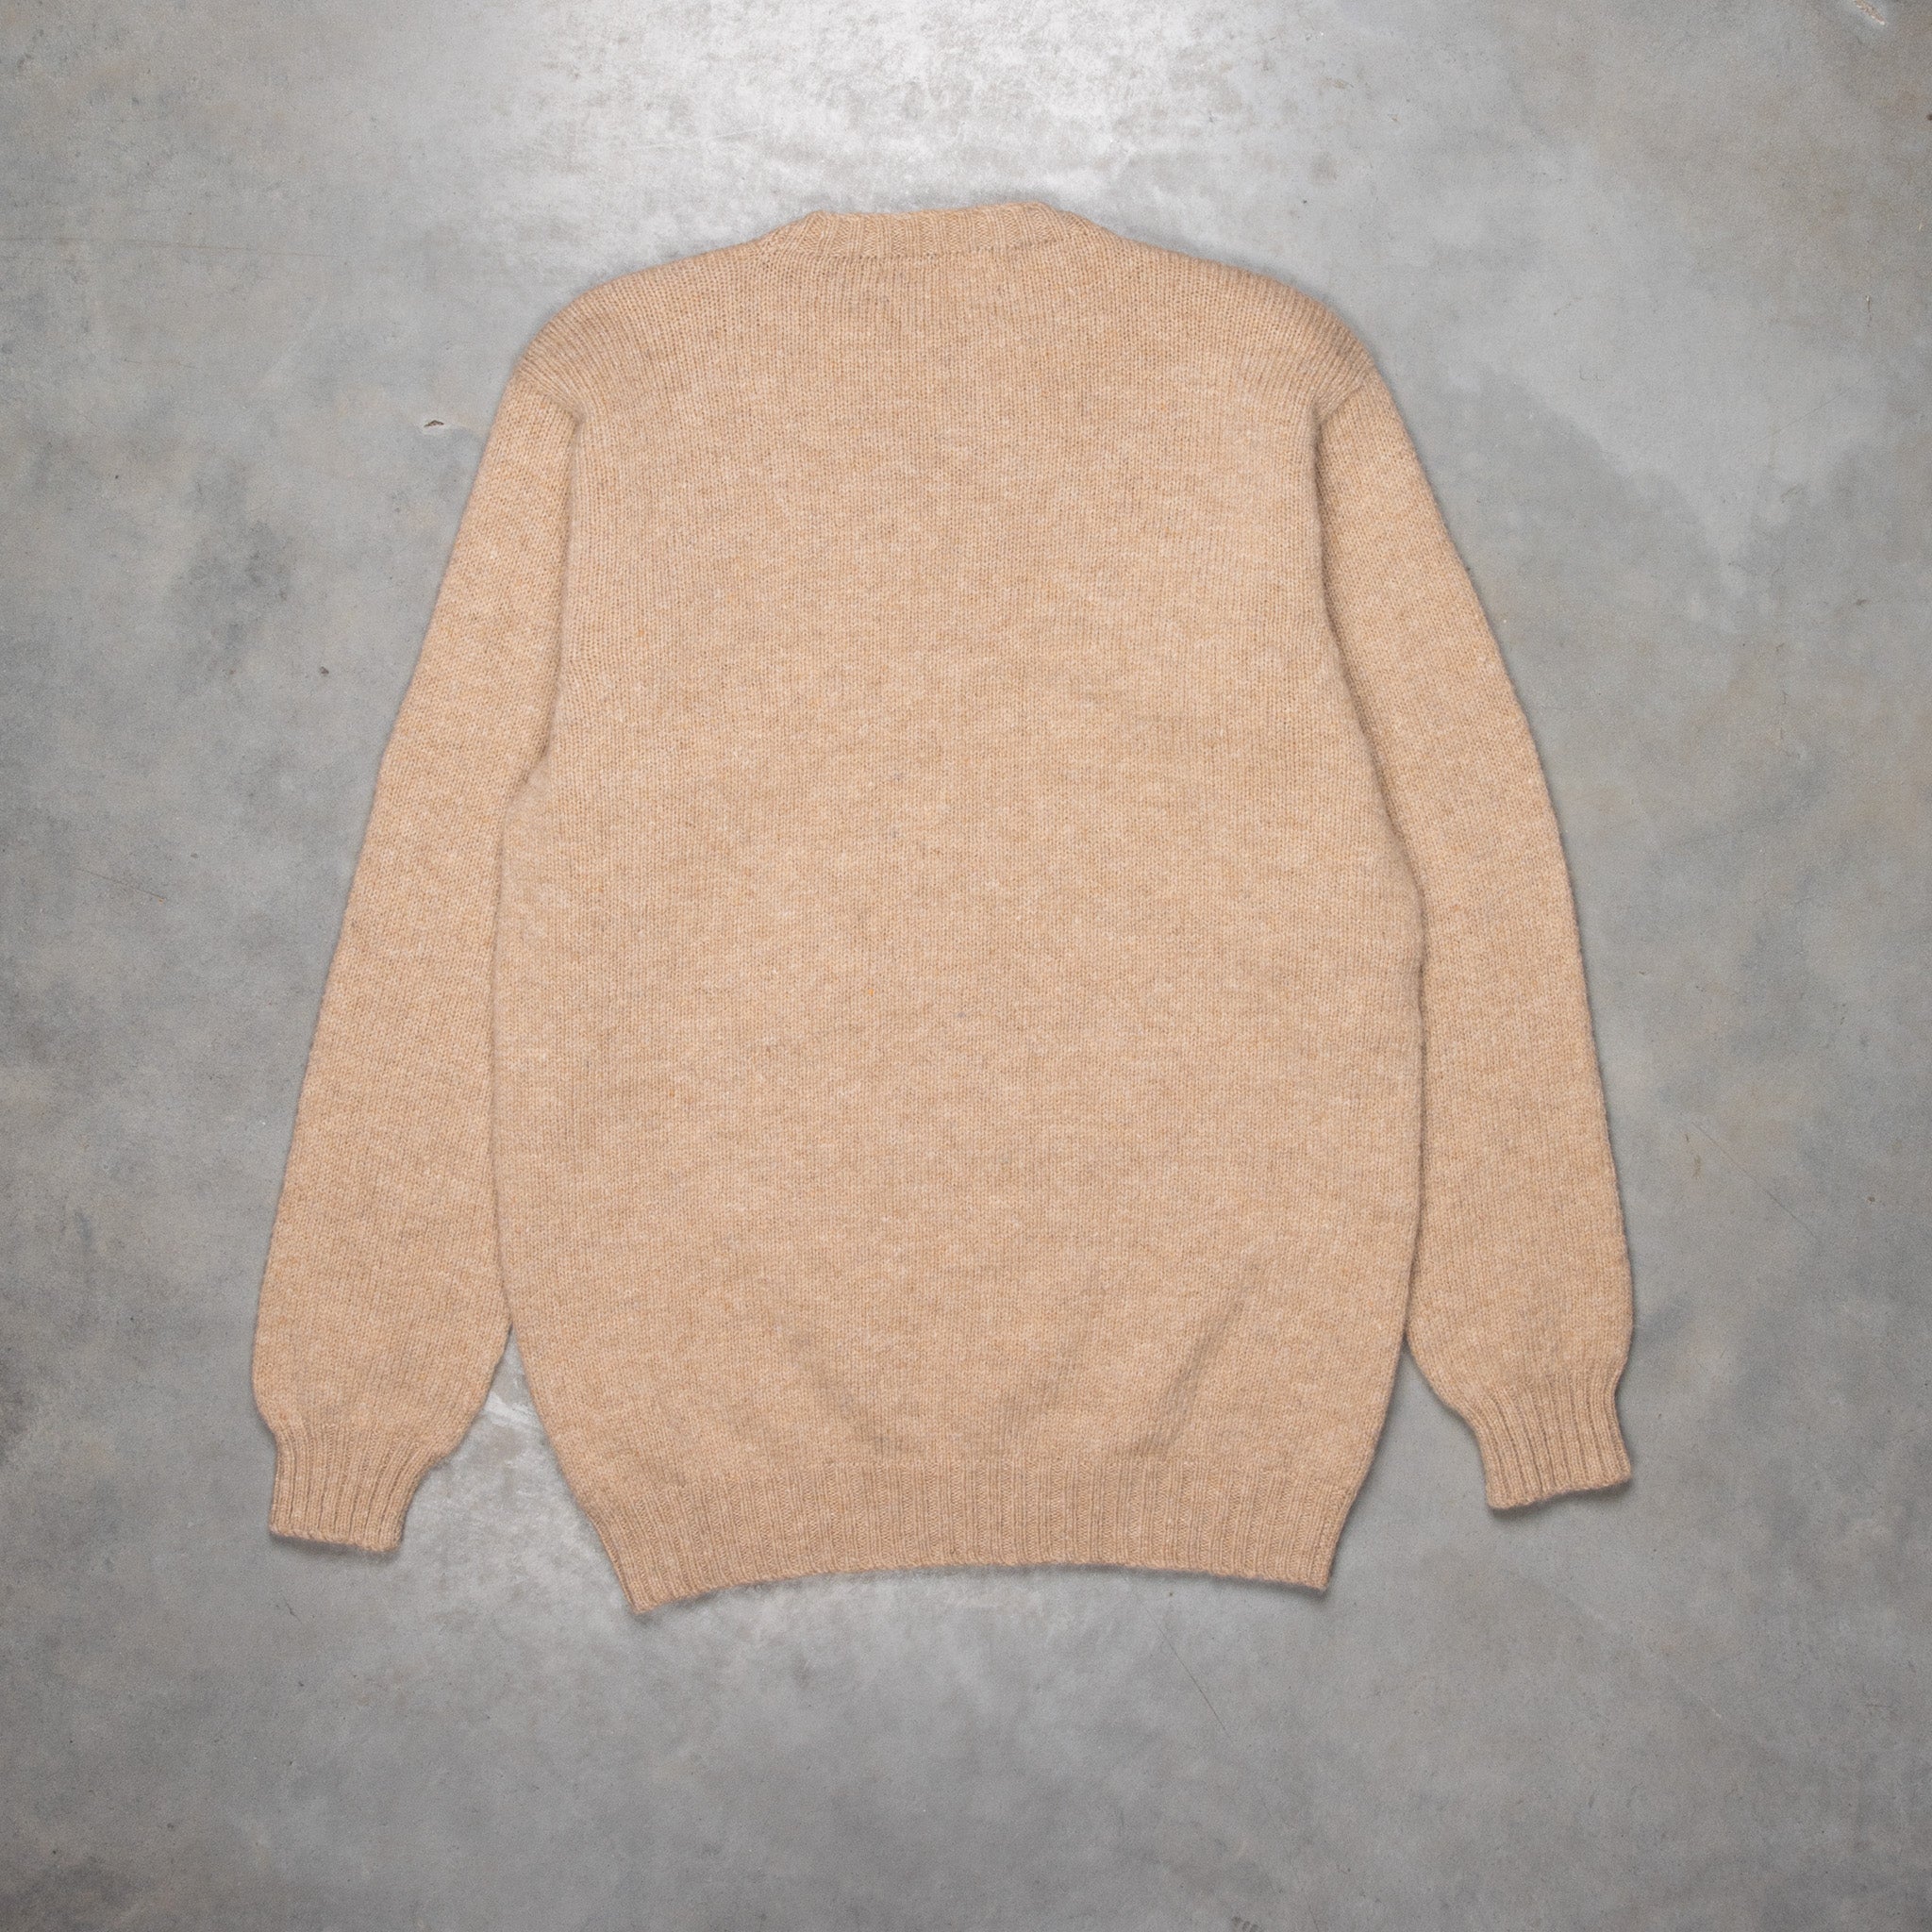 Laurence J. Smith Super soft Seamless Crew Neck Pullover Oatmilk